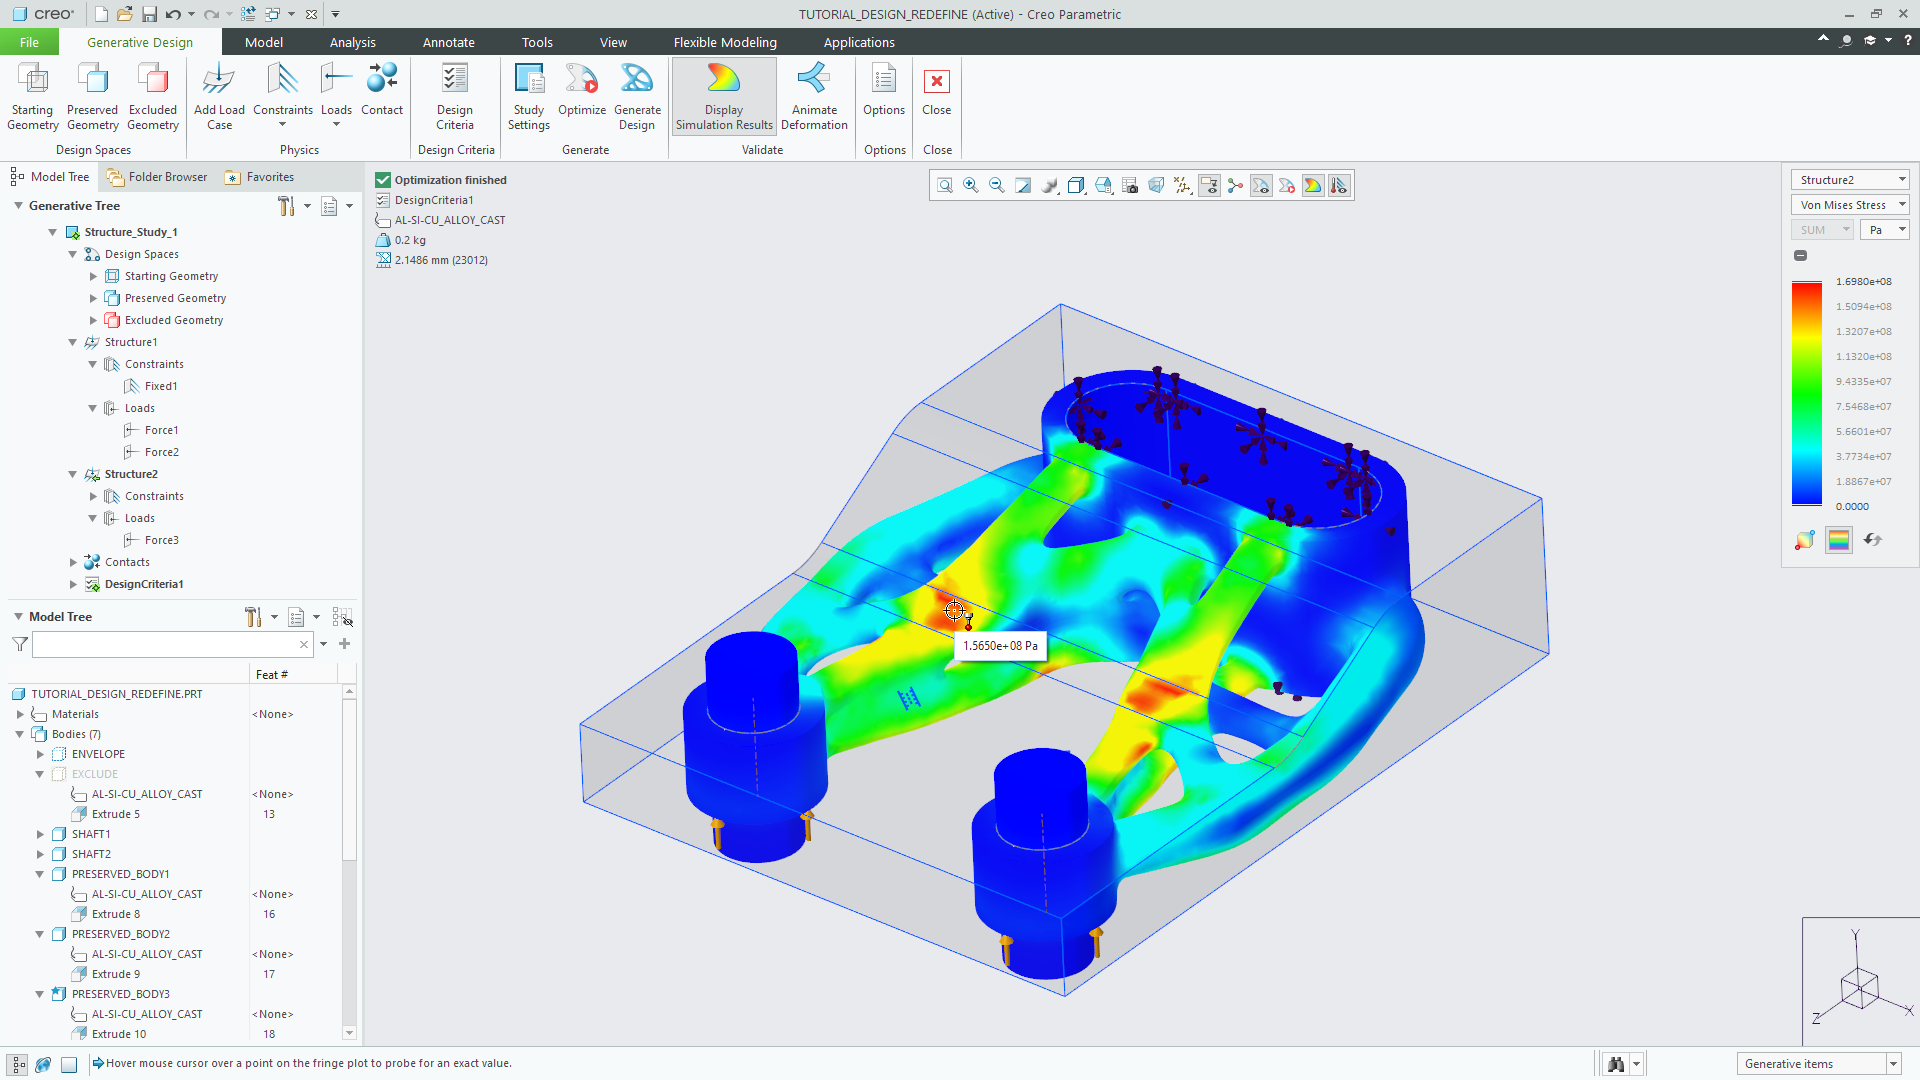 Sheet metal rules automation in creo parametric - PTC Community